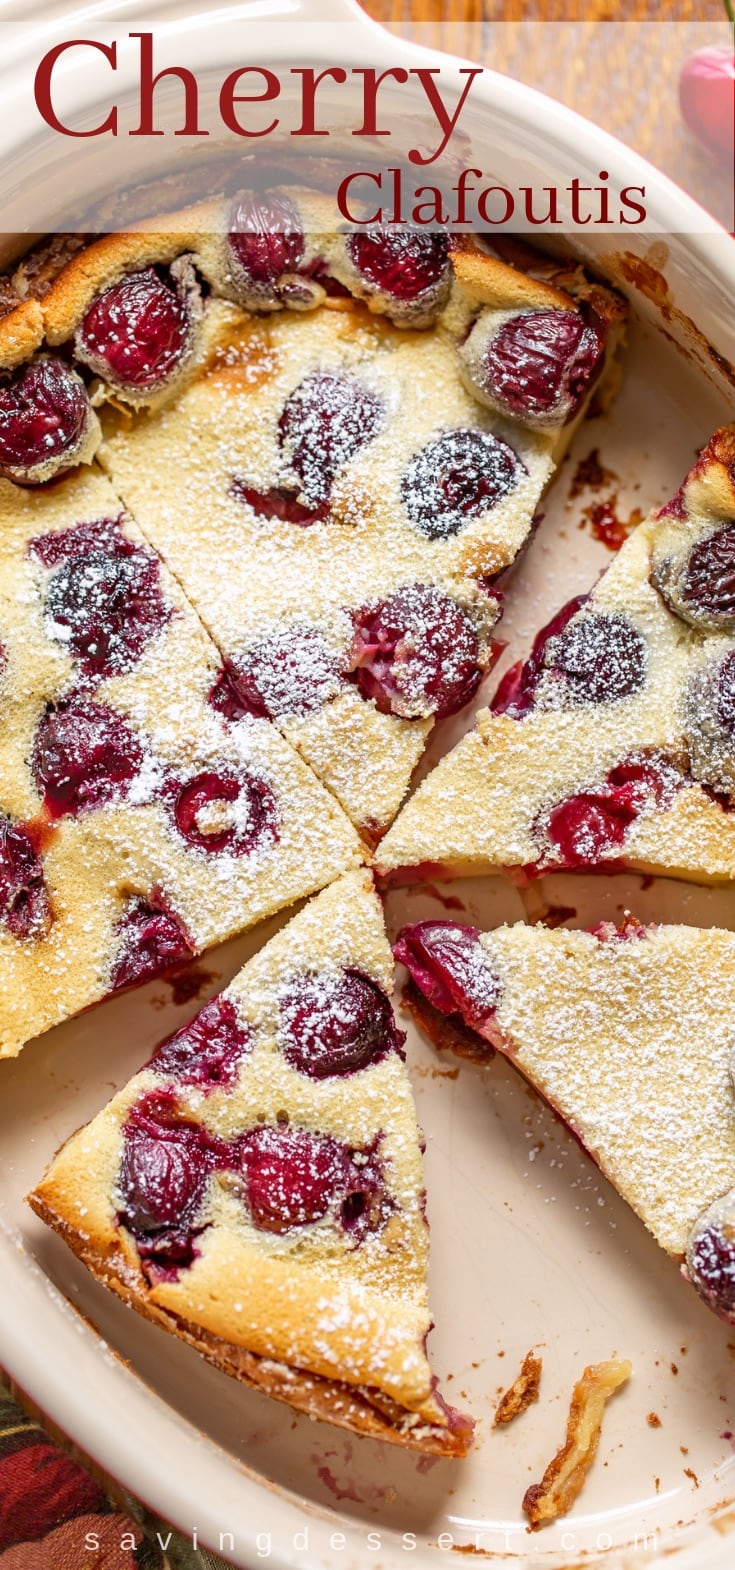 Wedges of sliced Cherry Clafoutis dusted with powdered sugar